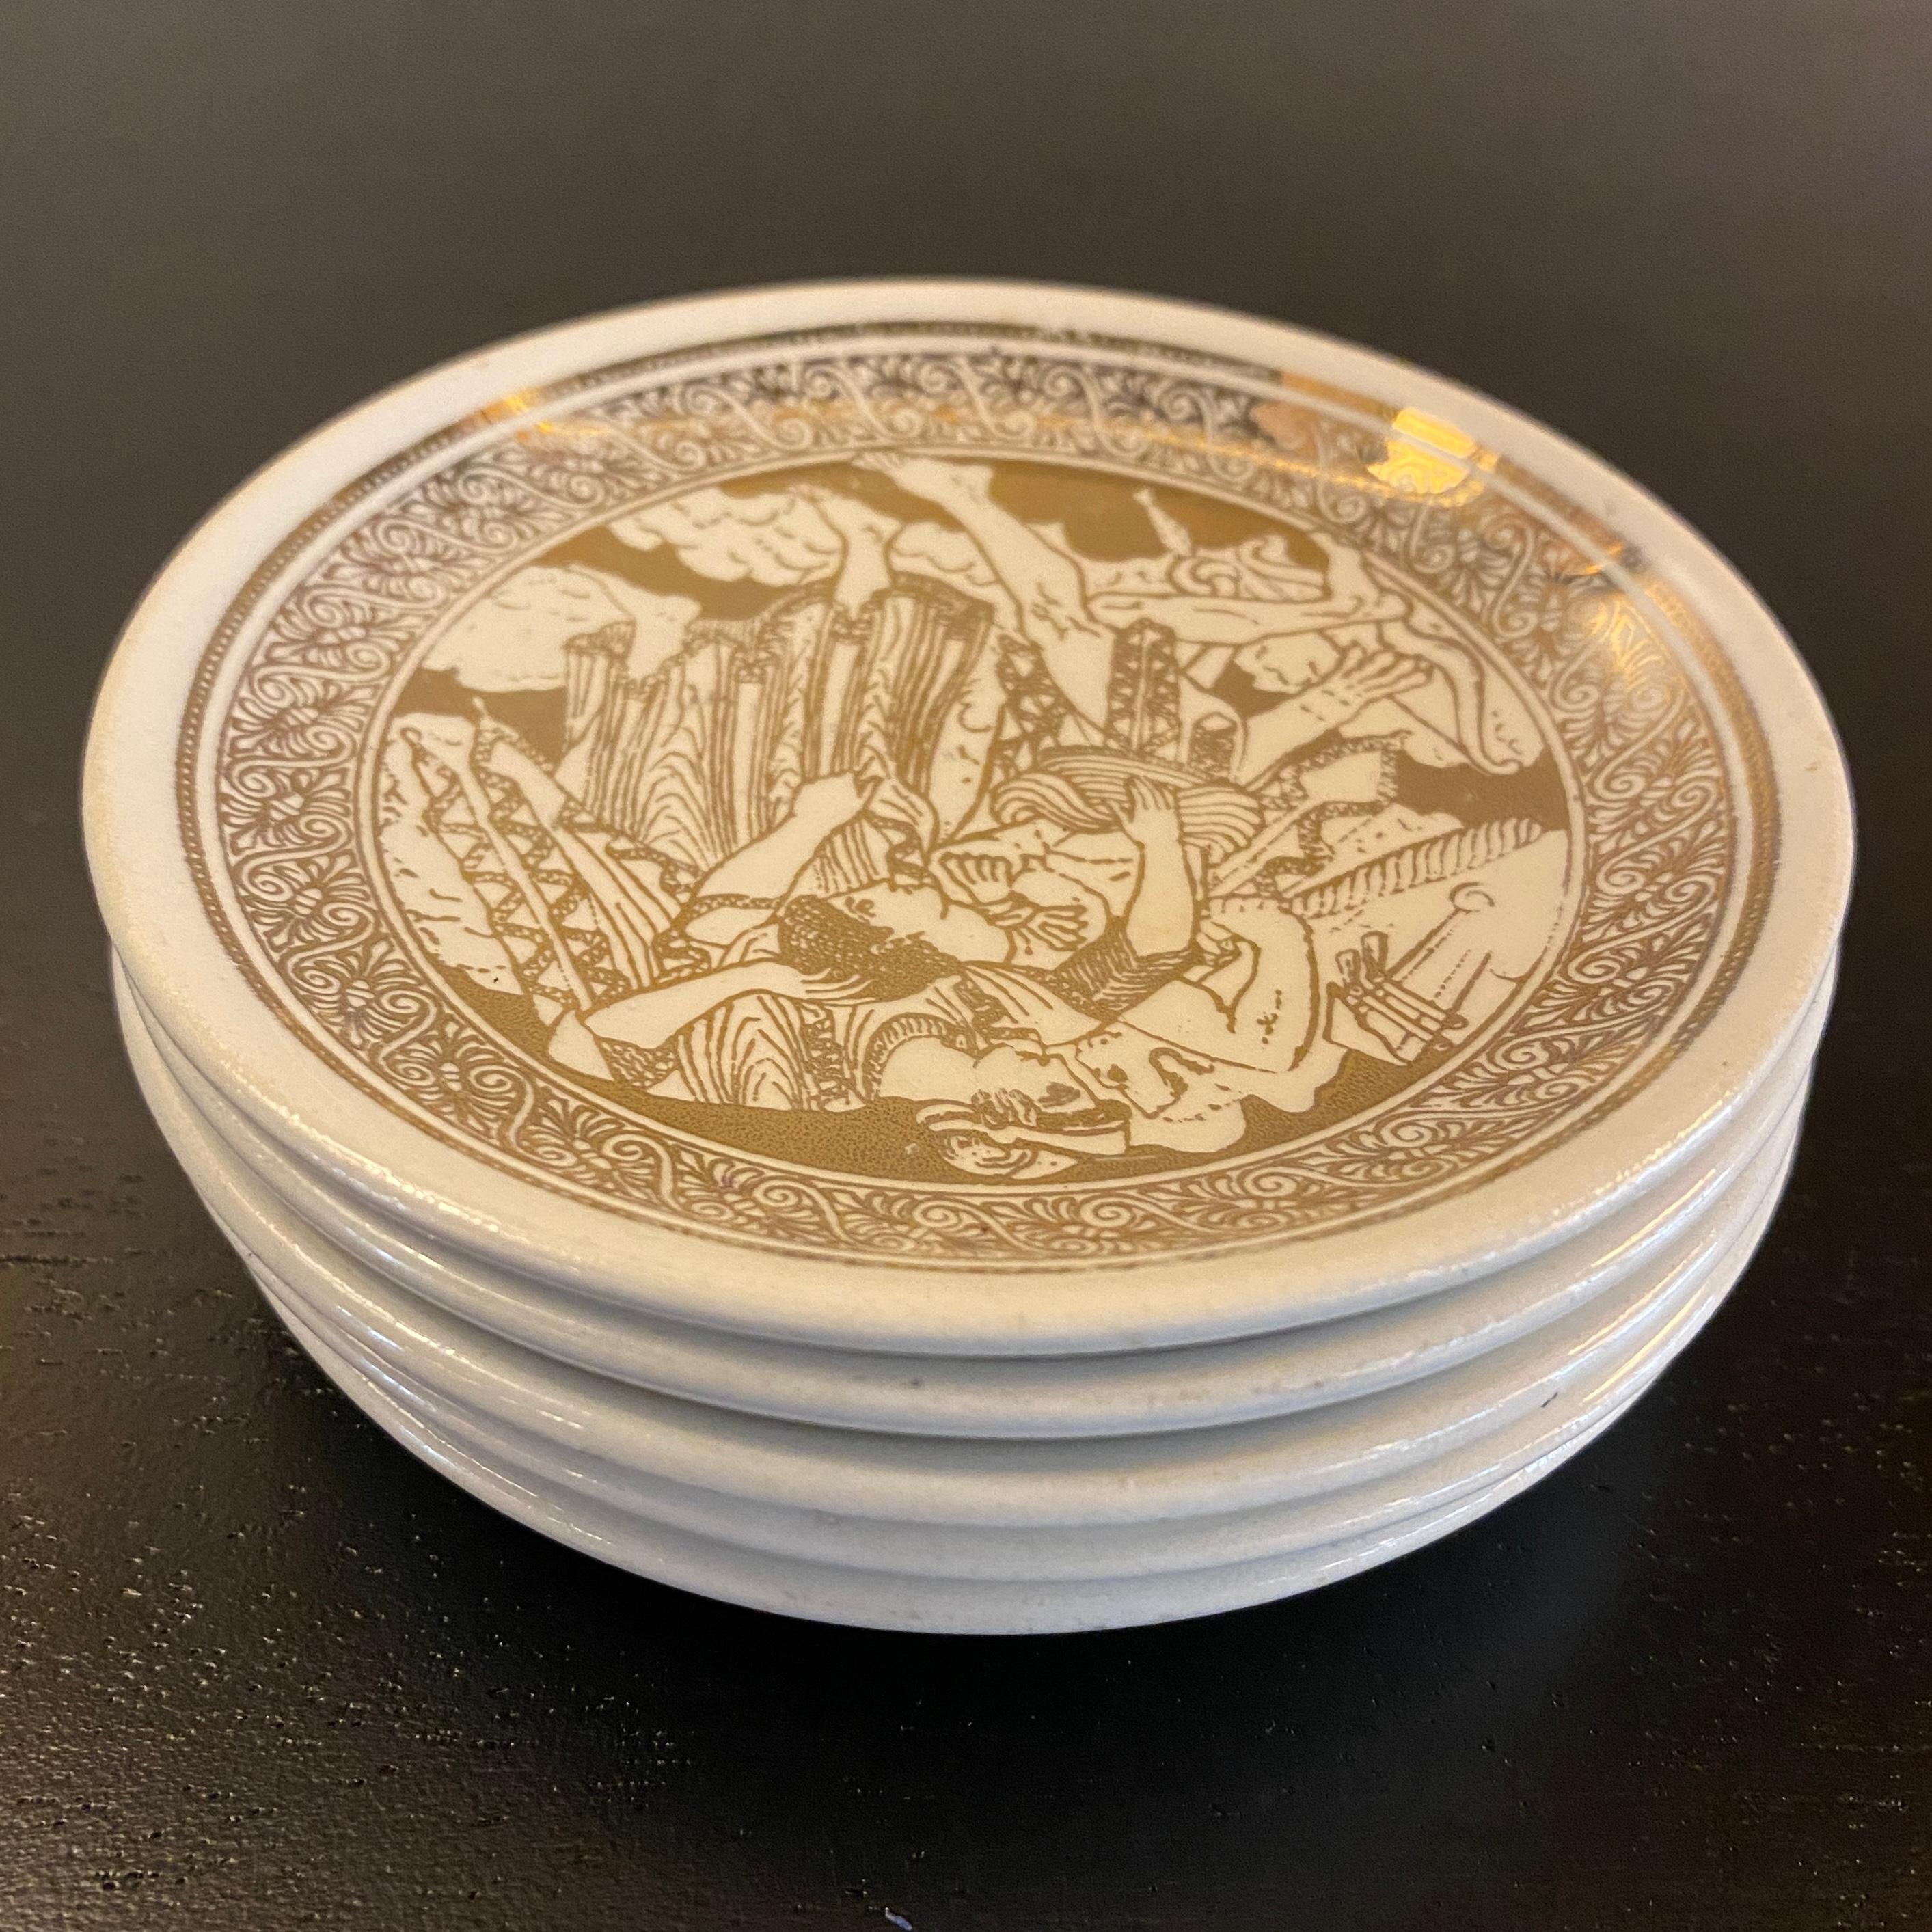 Set of 5 Piero Fornasetti Mitologia Gilt Porcelain Plates, Italy In Good Condition For Sale In Brooklyn, NY